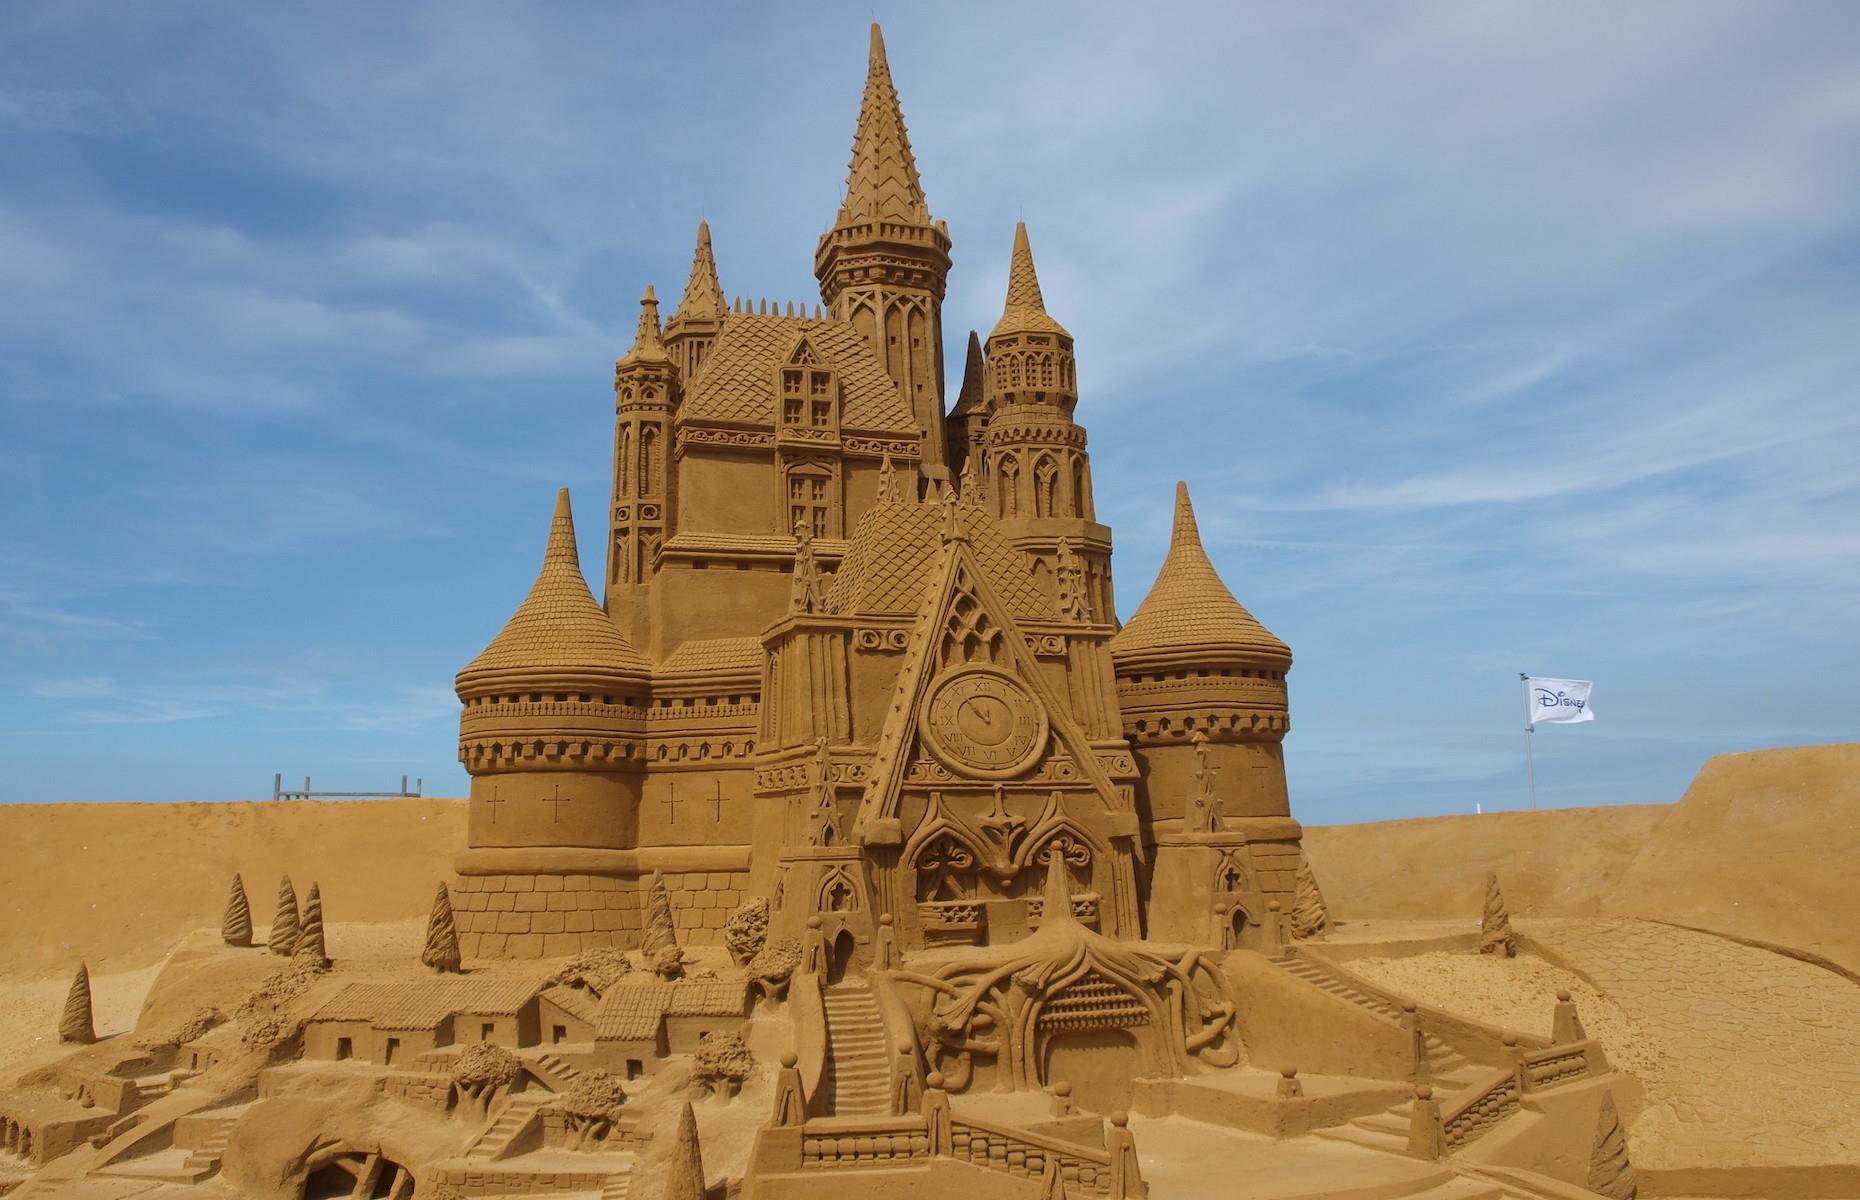 A hefty sprinkle of fairy tale magic lands on the shores of Ostend during the Disney Sand Magic Festival. The 2017 event on Belgium’s sandy coastline celebrated Disneyland Paris’ 25th Anniversary. Thirty-two expert sand sculptors used a total of 6,350 tons of sand to create 150 different sand sculptures over five weeks that depicted characters and scenes from the entertainment brand – pictured here is a reimagination of the French park's Disney castle.